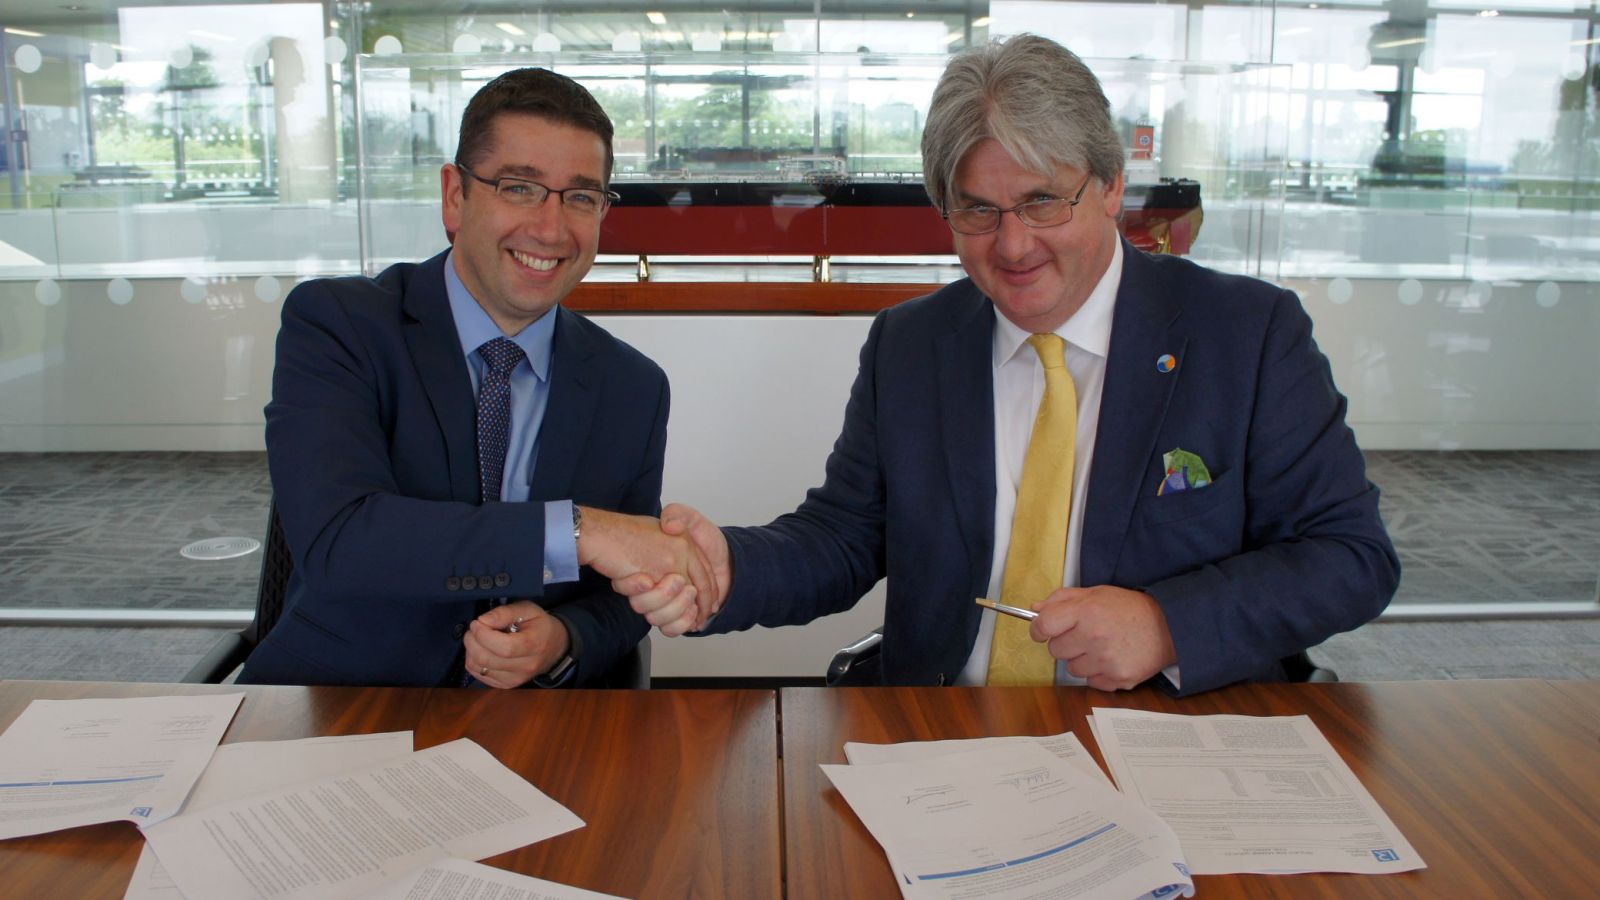 Pictured (L-R): Nick Brown, Marine and Offshore Director, Lloyd's Register and Andrew Marshall, Chief Executive, Coldharbour Marine. LR will oversee the complete range of tests required by the US Coast Guard (USCG) in its type approval process.